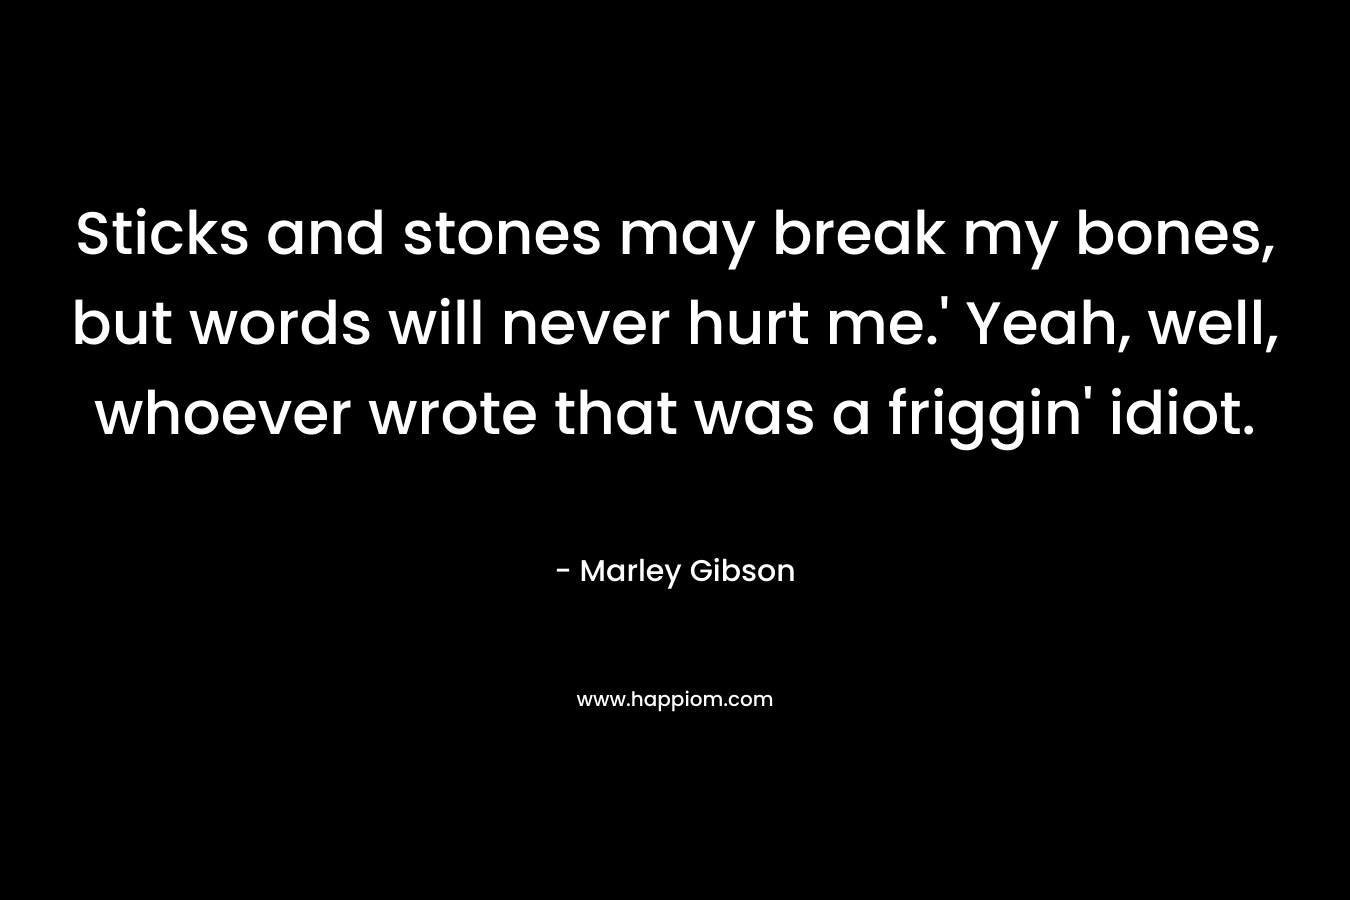 Sticks and stones may break my bones, but words will never hurt me.’ Yeah, well, whoever wrote that was a friggin’ idiot. – Marley Gibson